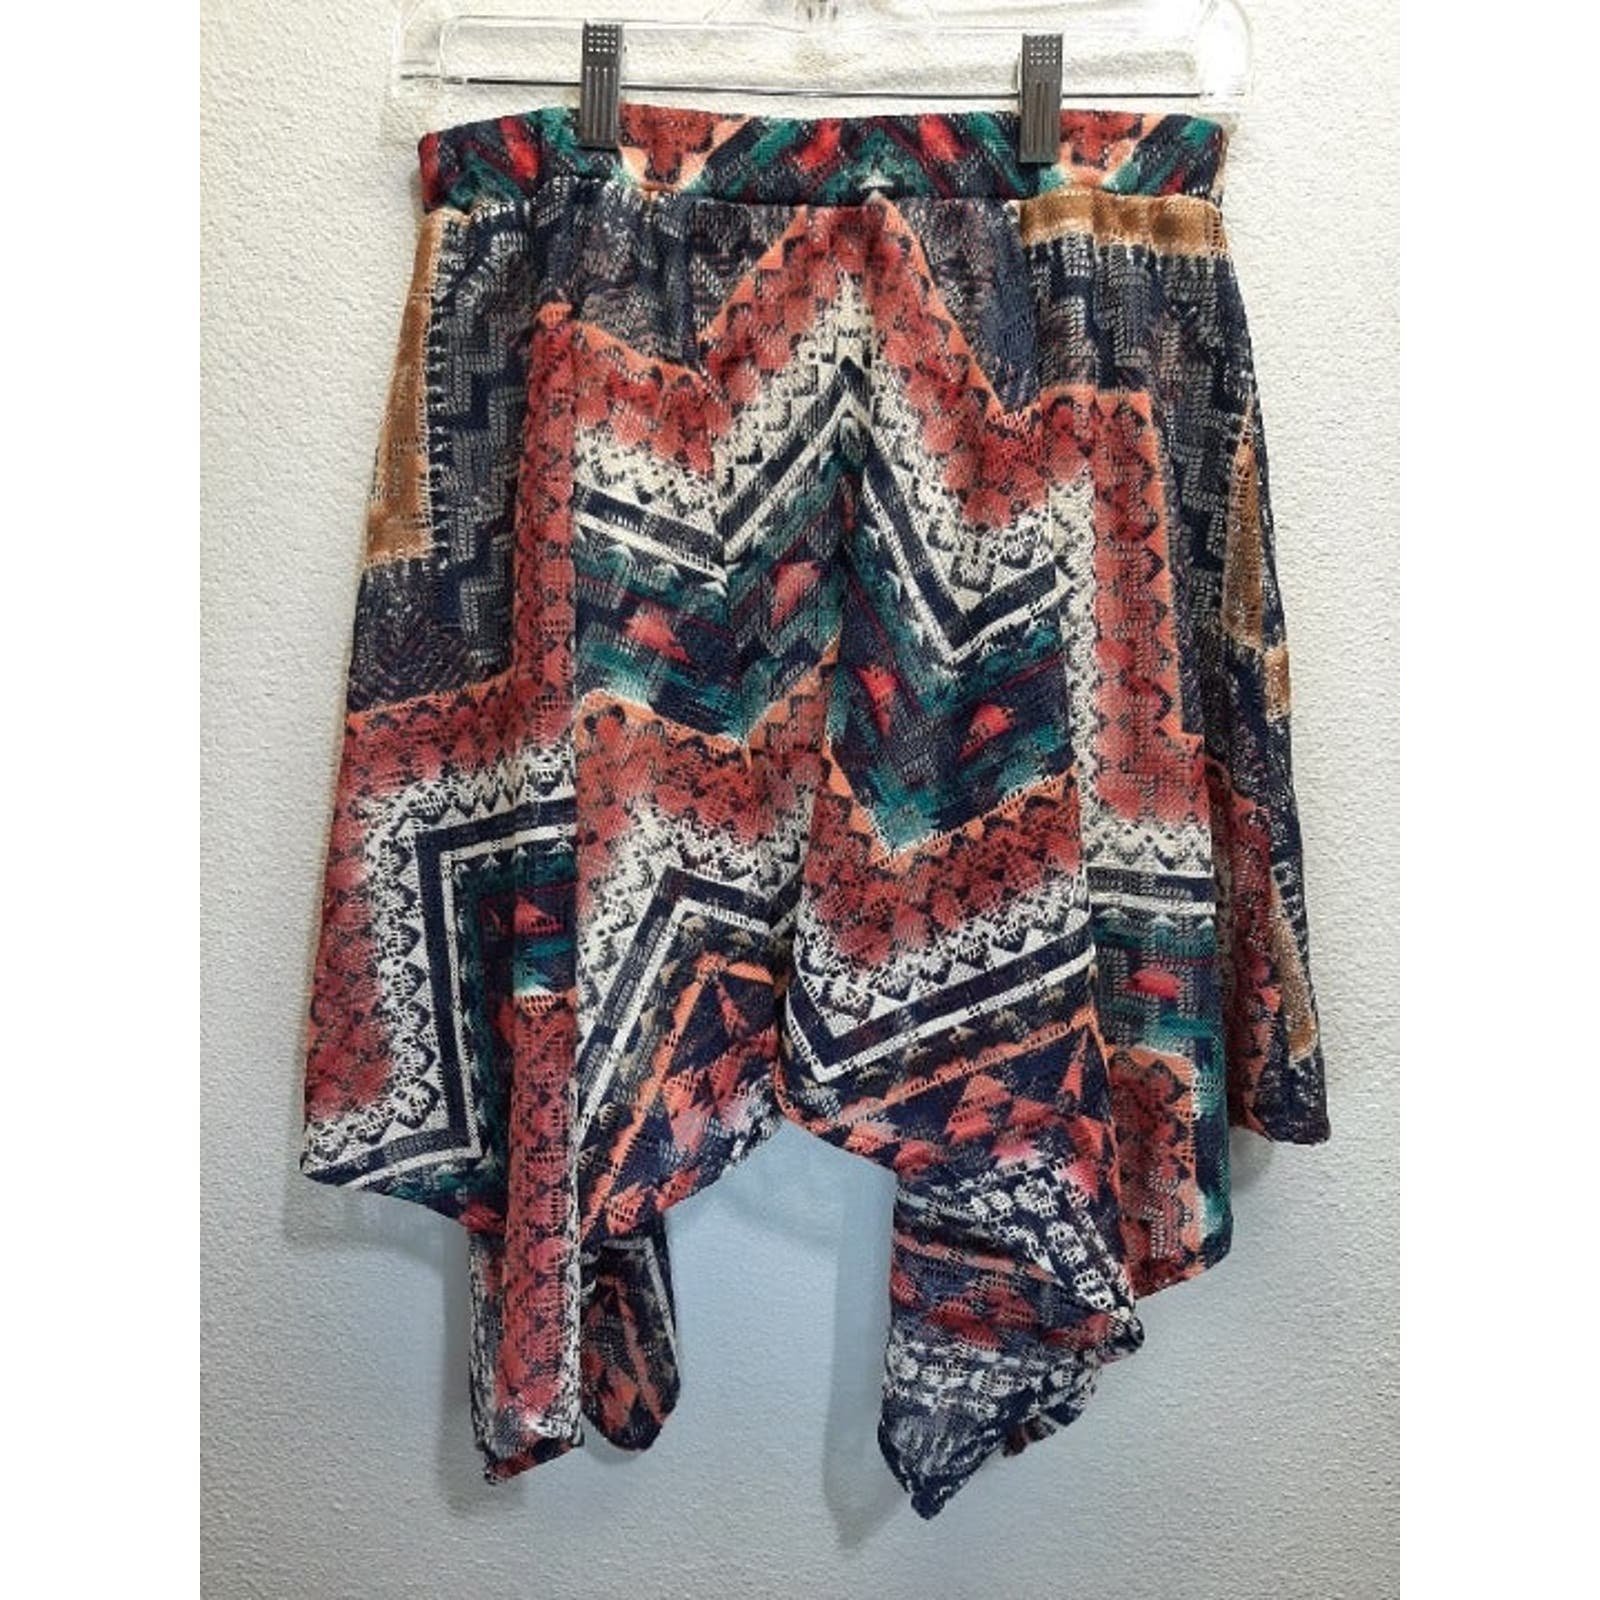 Authentic Vanity Geometerical Design Pull-on Skirt l Size: M hgWZQWJLN for sale